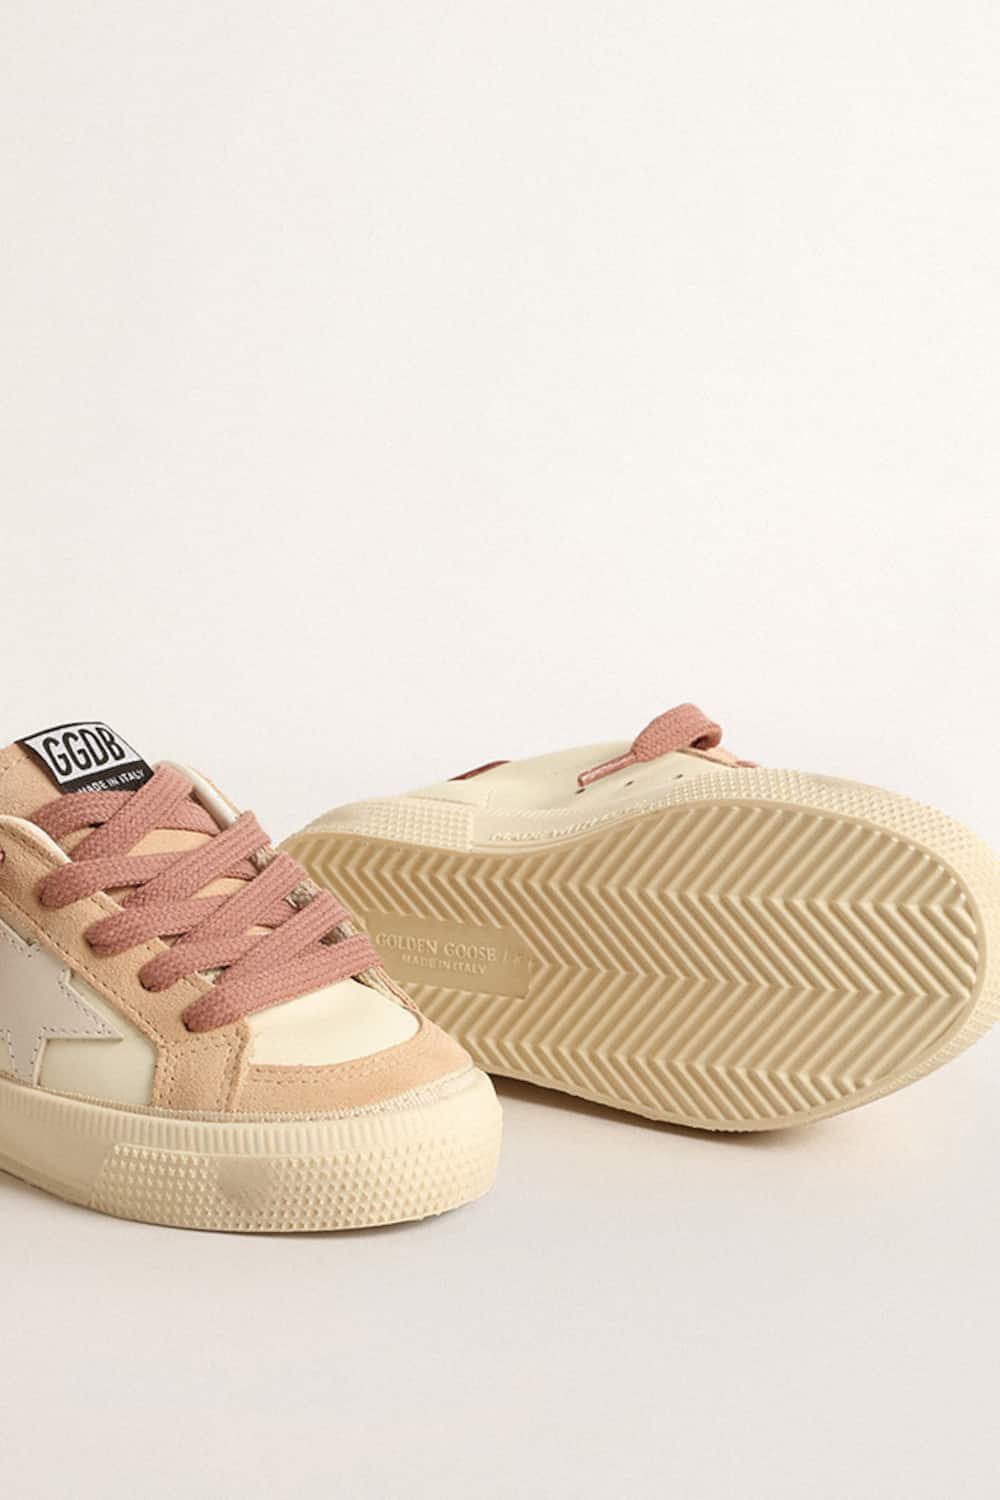 Golden Goose - Young May in cream leather with suede star and heel tab in 